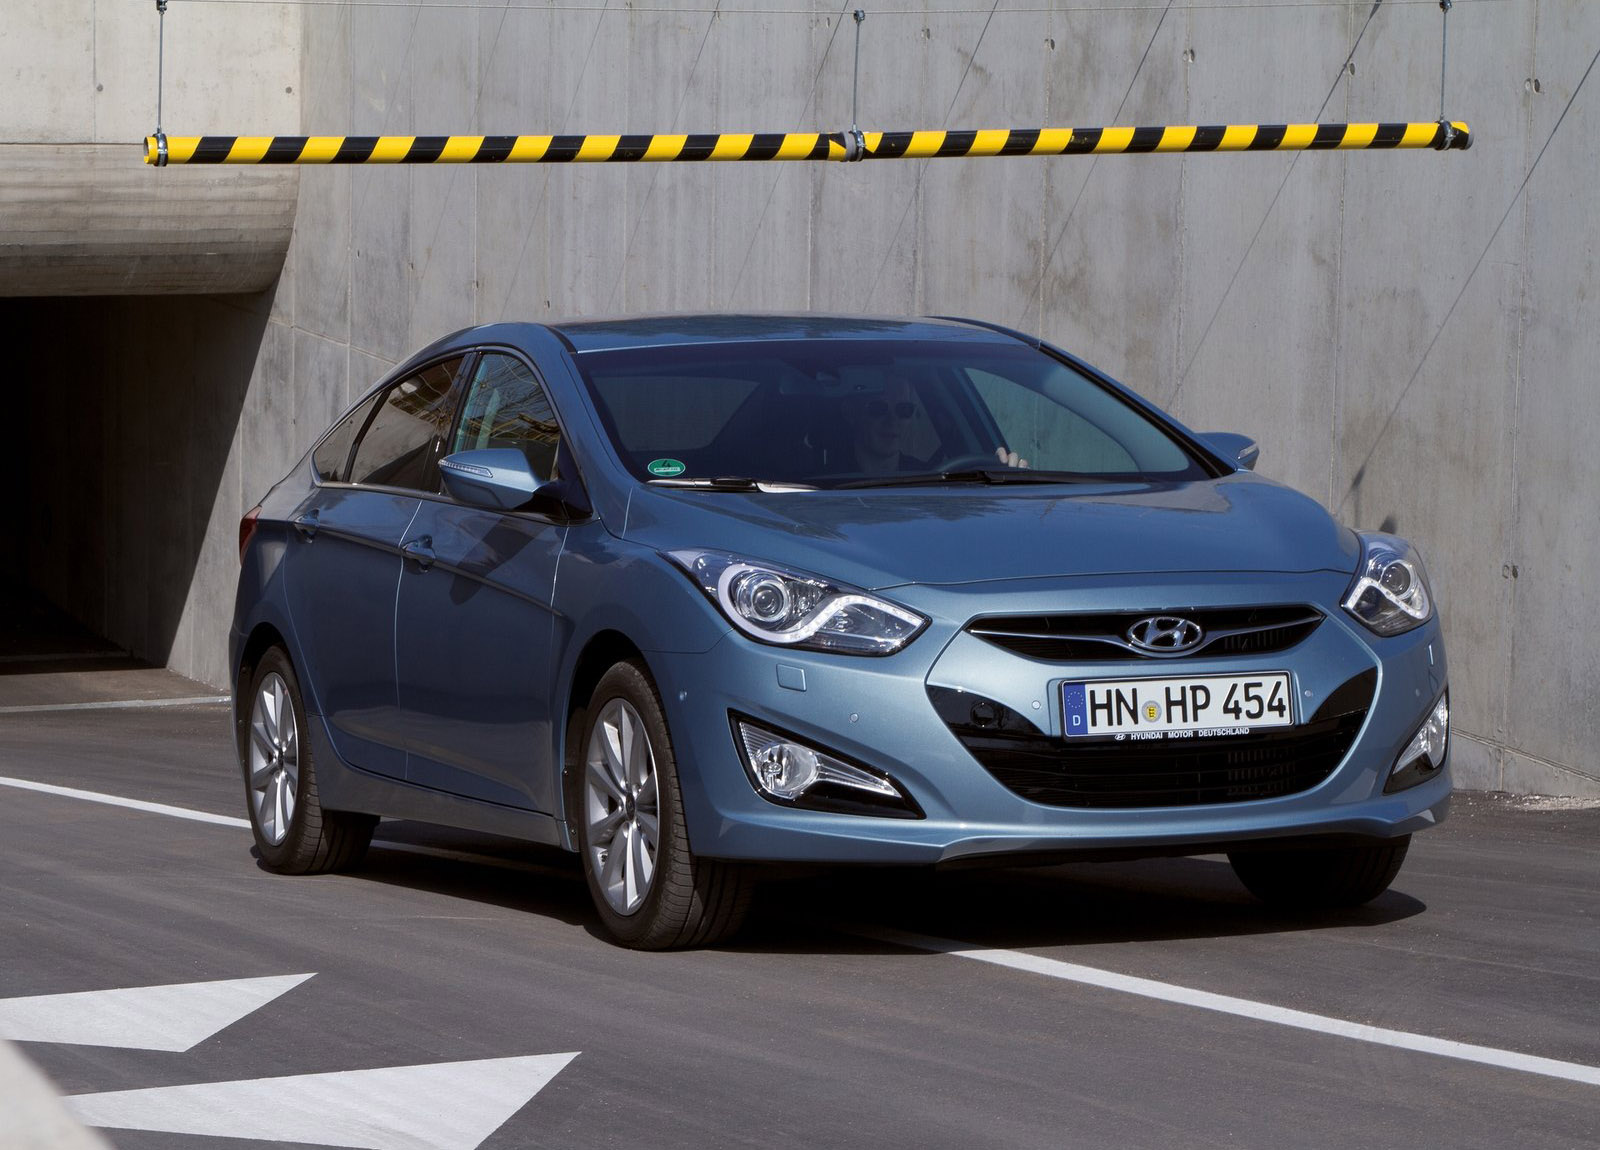 2012 Hyundai i40 - HD Pictures @